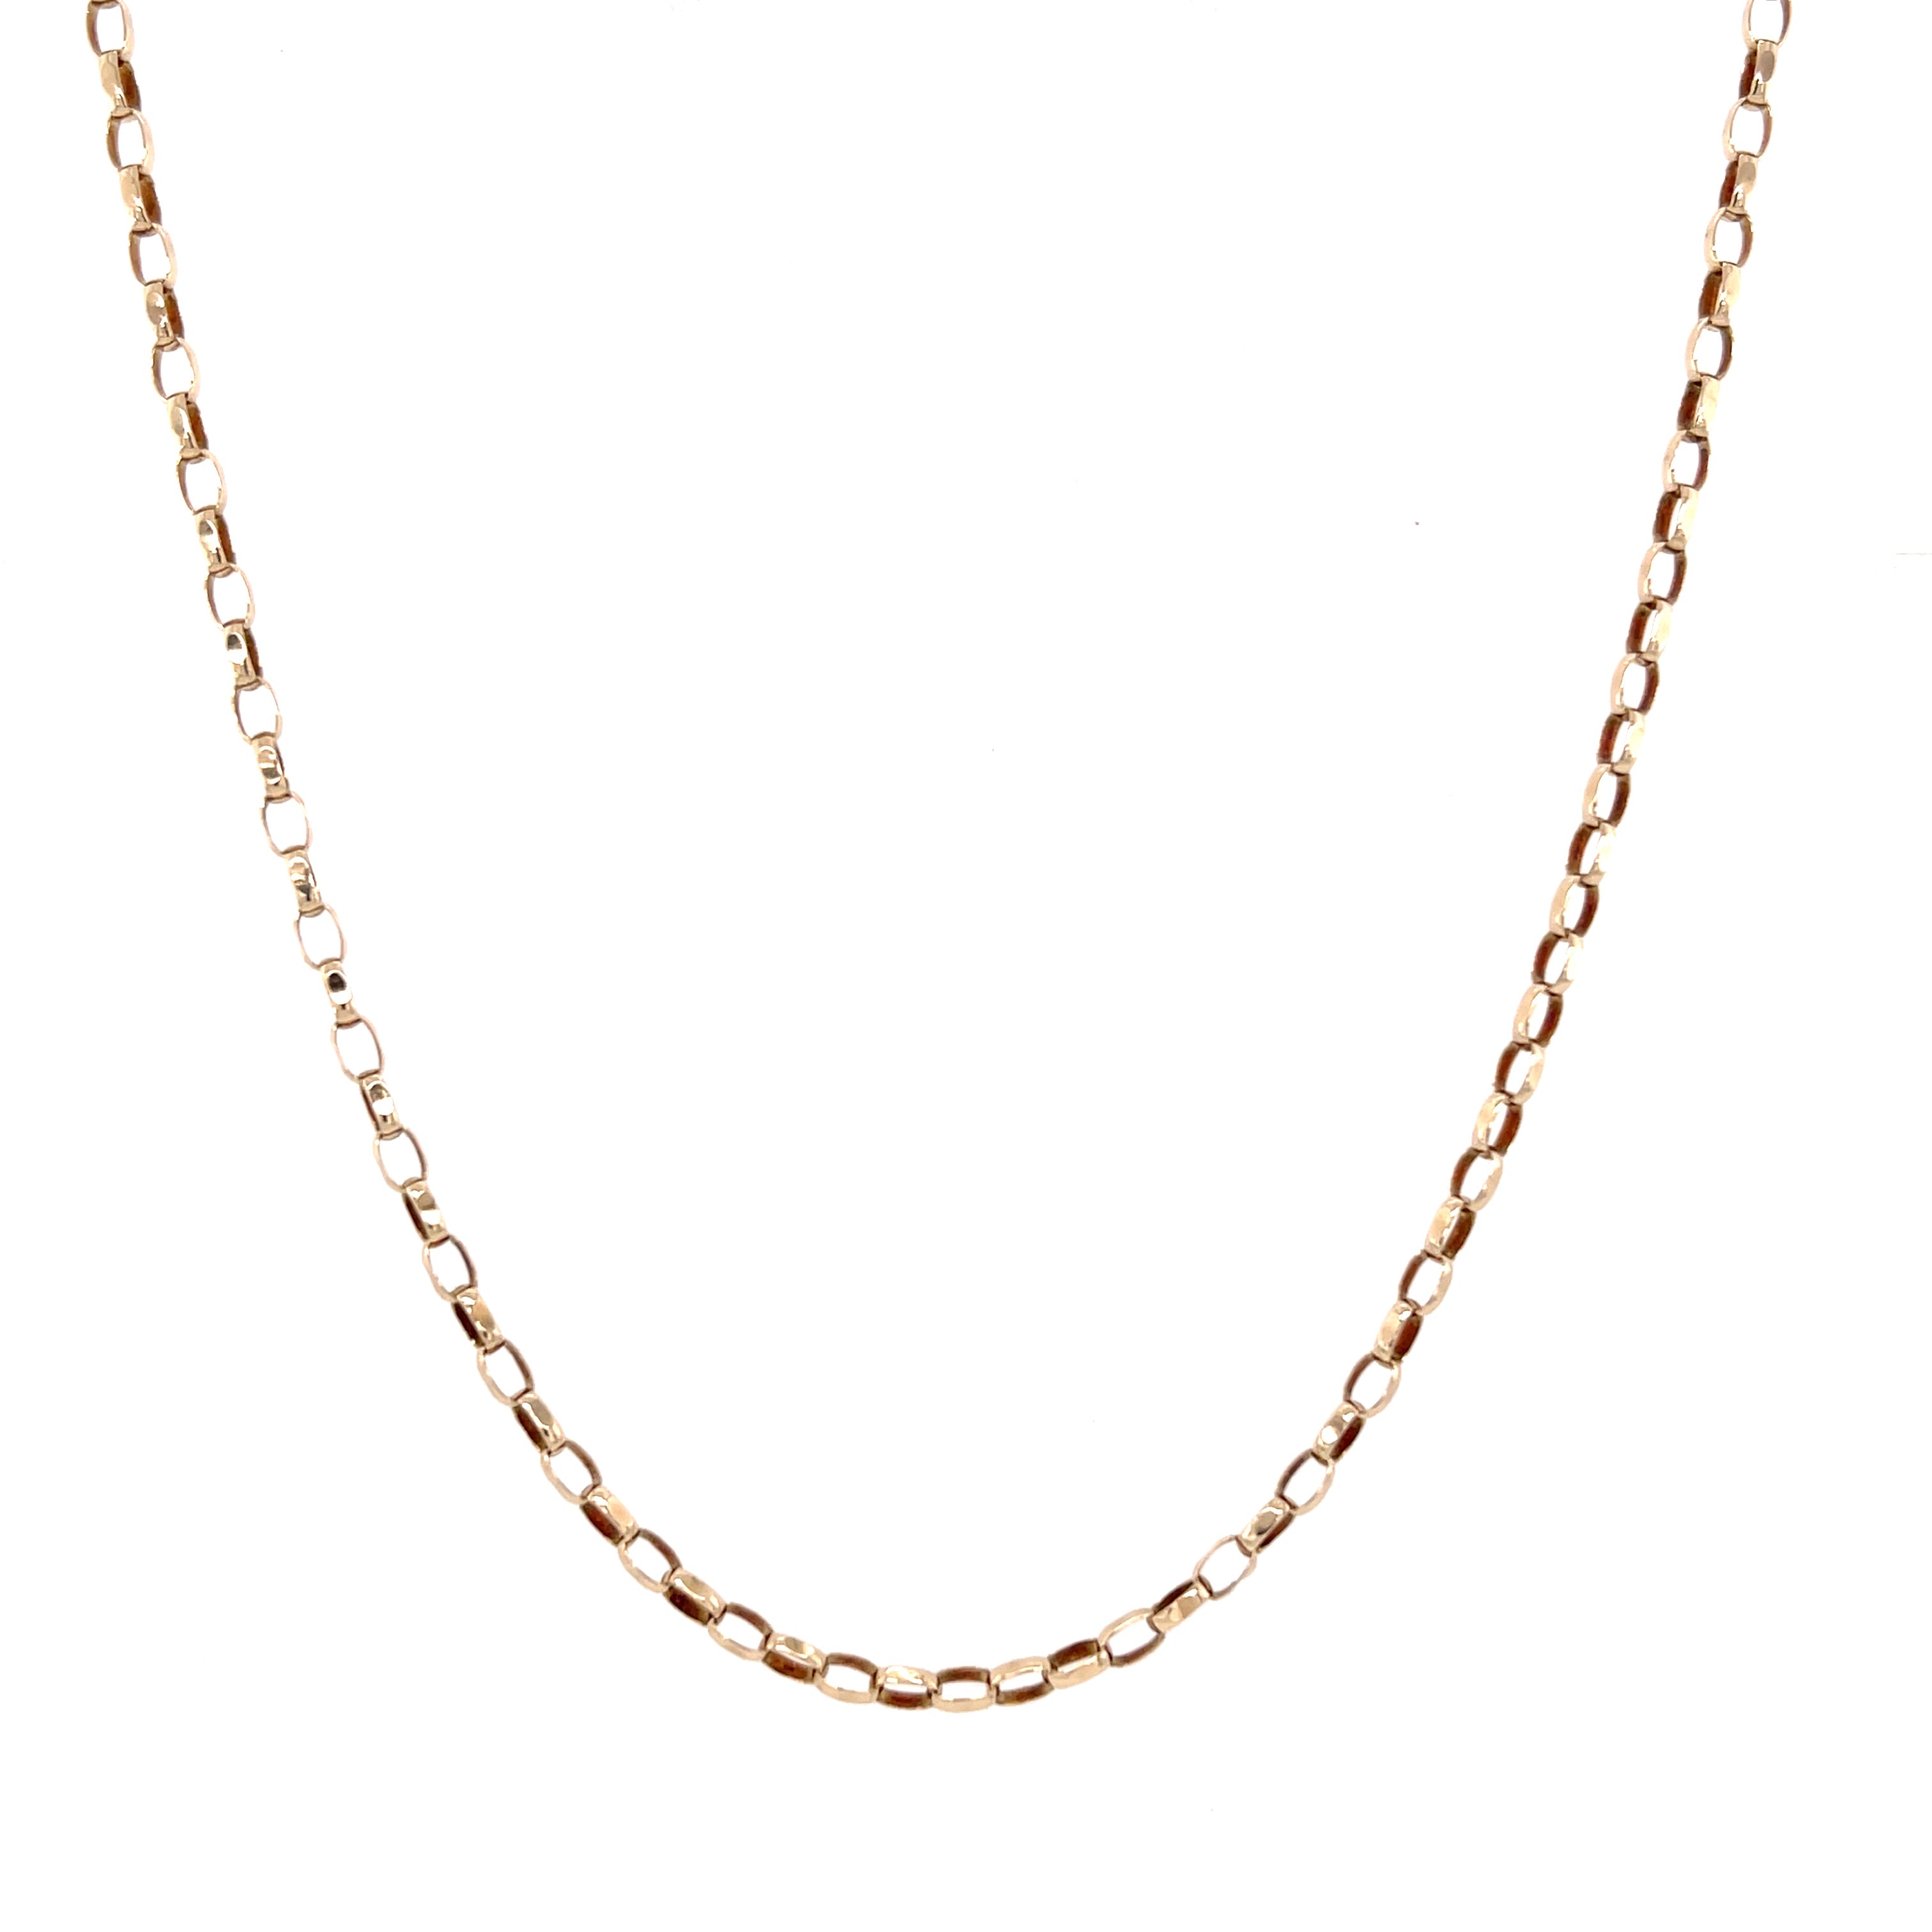 9ct Yellow Gold Oval Link 20" Diamond Cut Belcher Chain - 3.92g SOLD